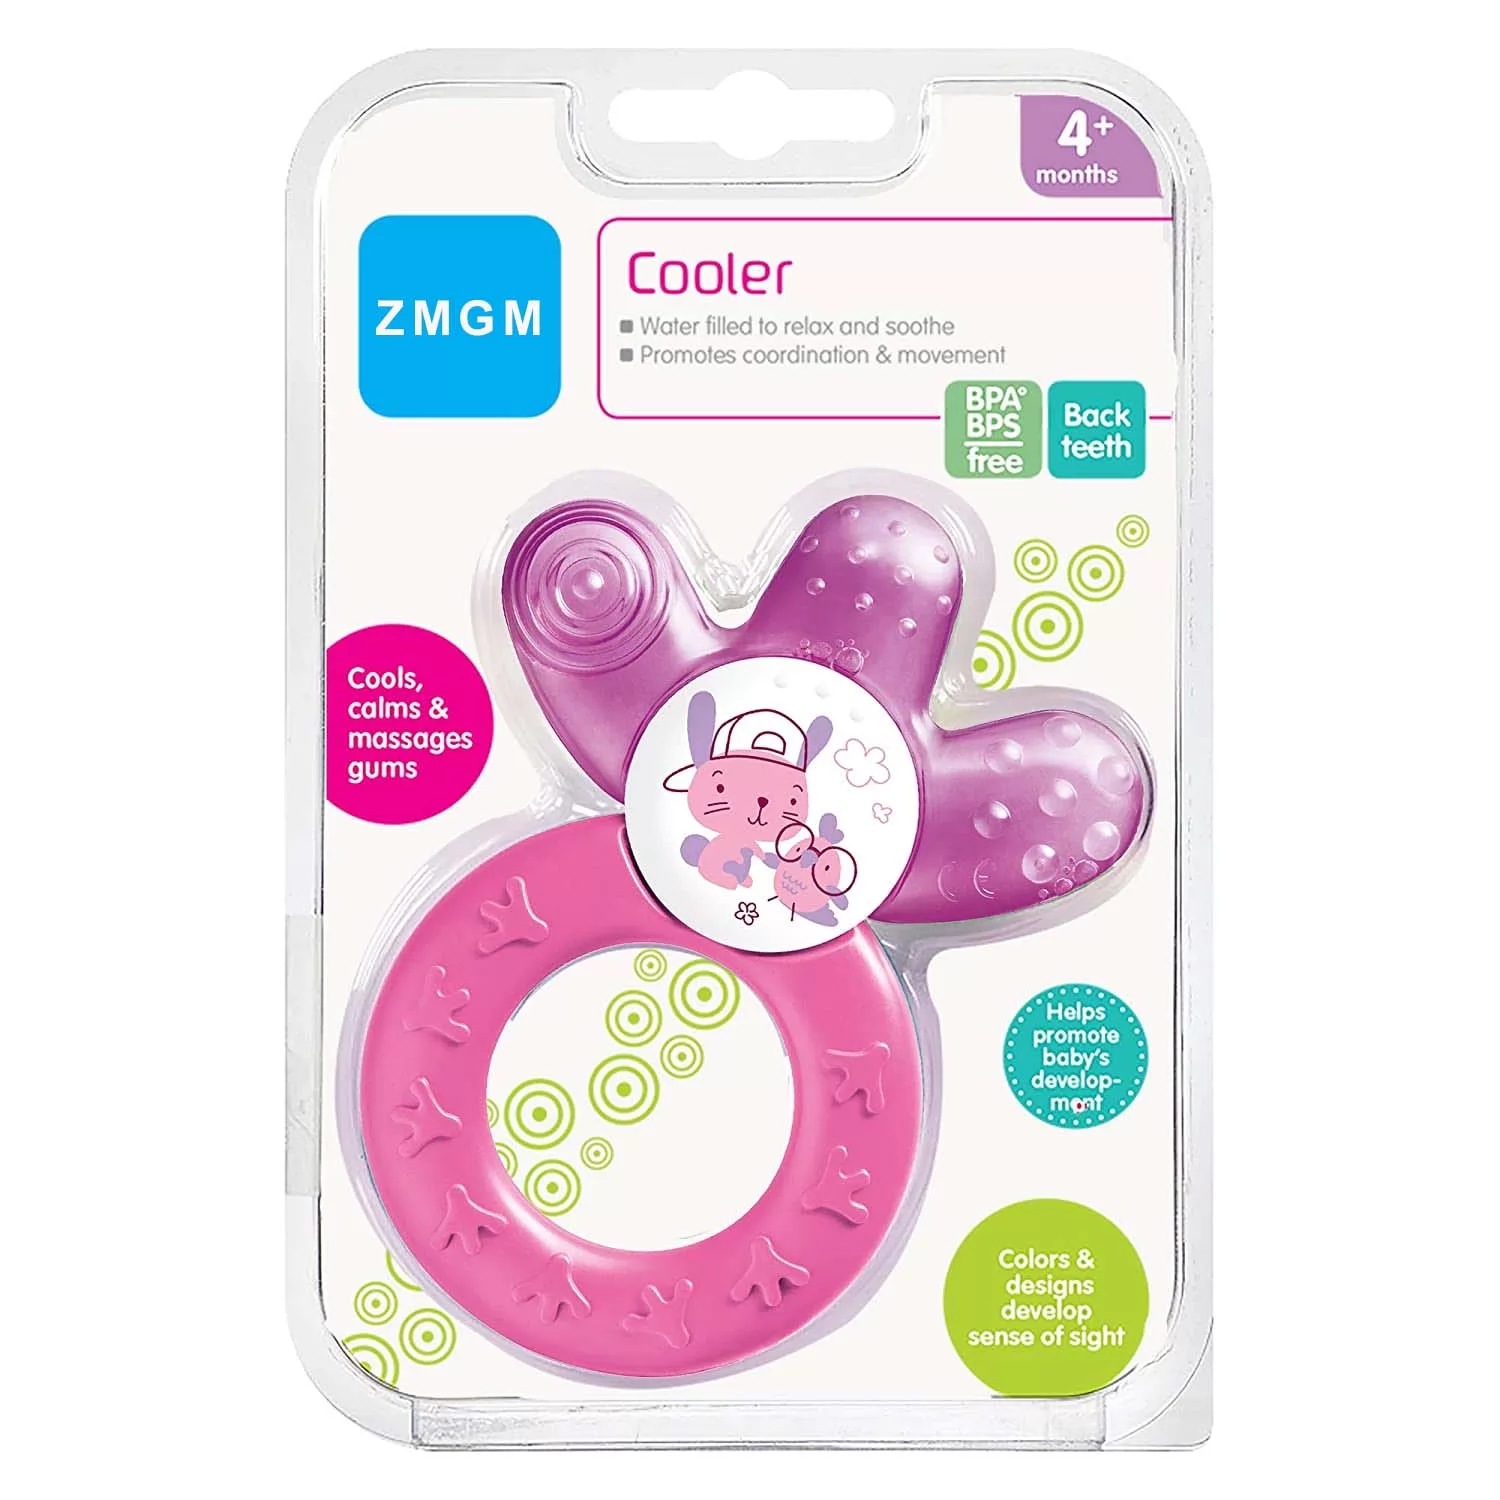 ZMGM Cooler Teether, Baby Toys, Teething Toys, Purified Water-Filled Teether Toy for Gum Relief and Sensory Development, for Girls 4+ Months, 1-Count